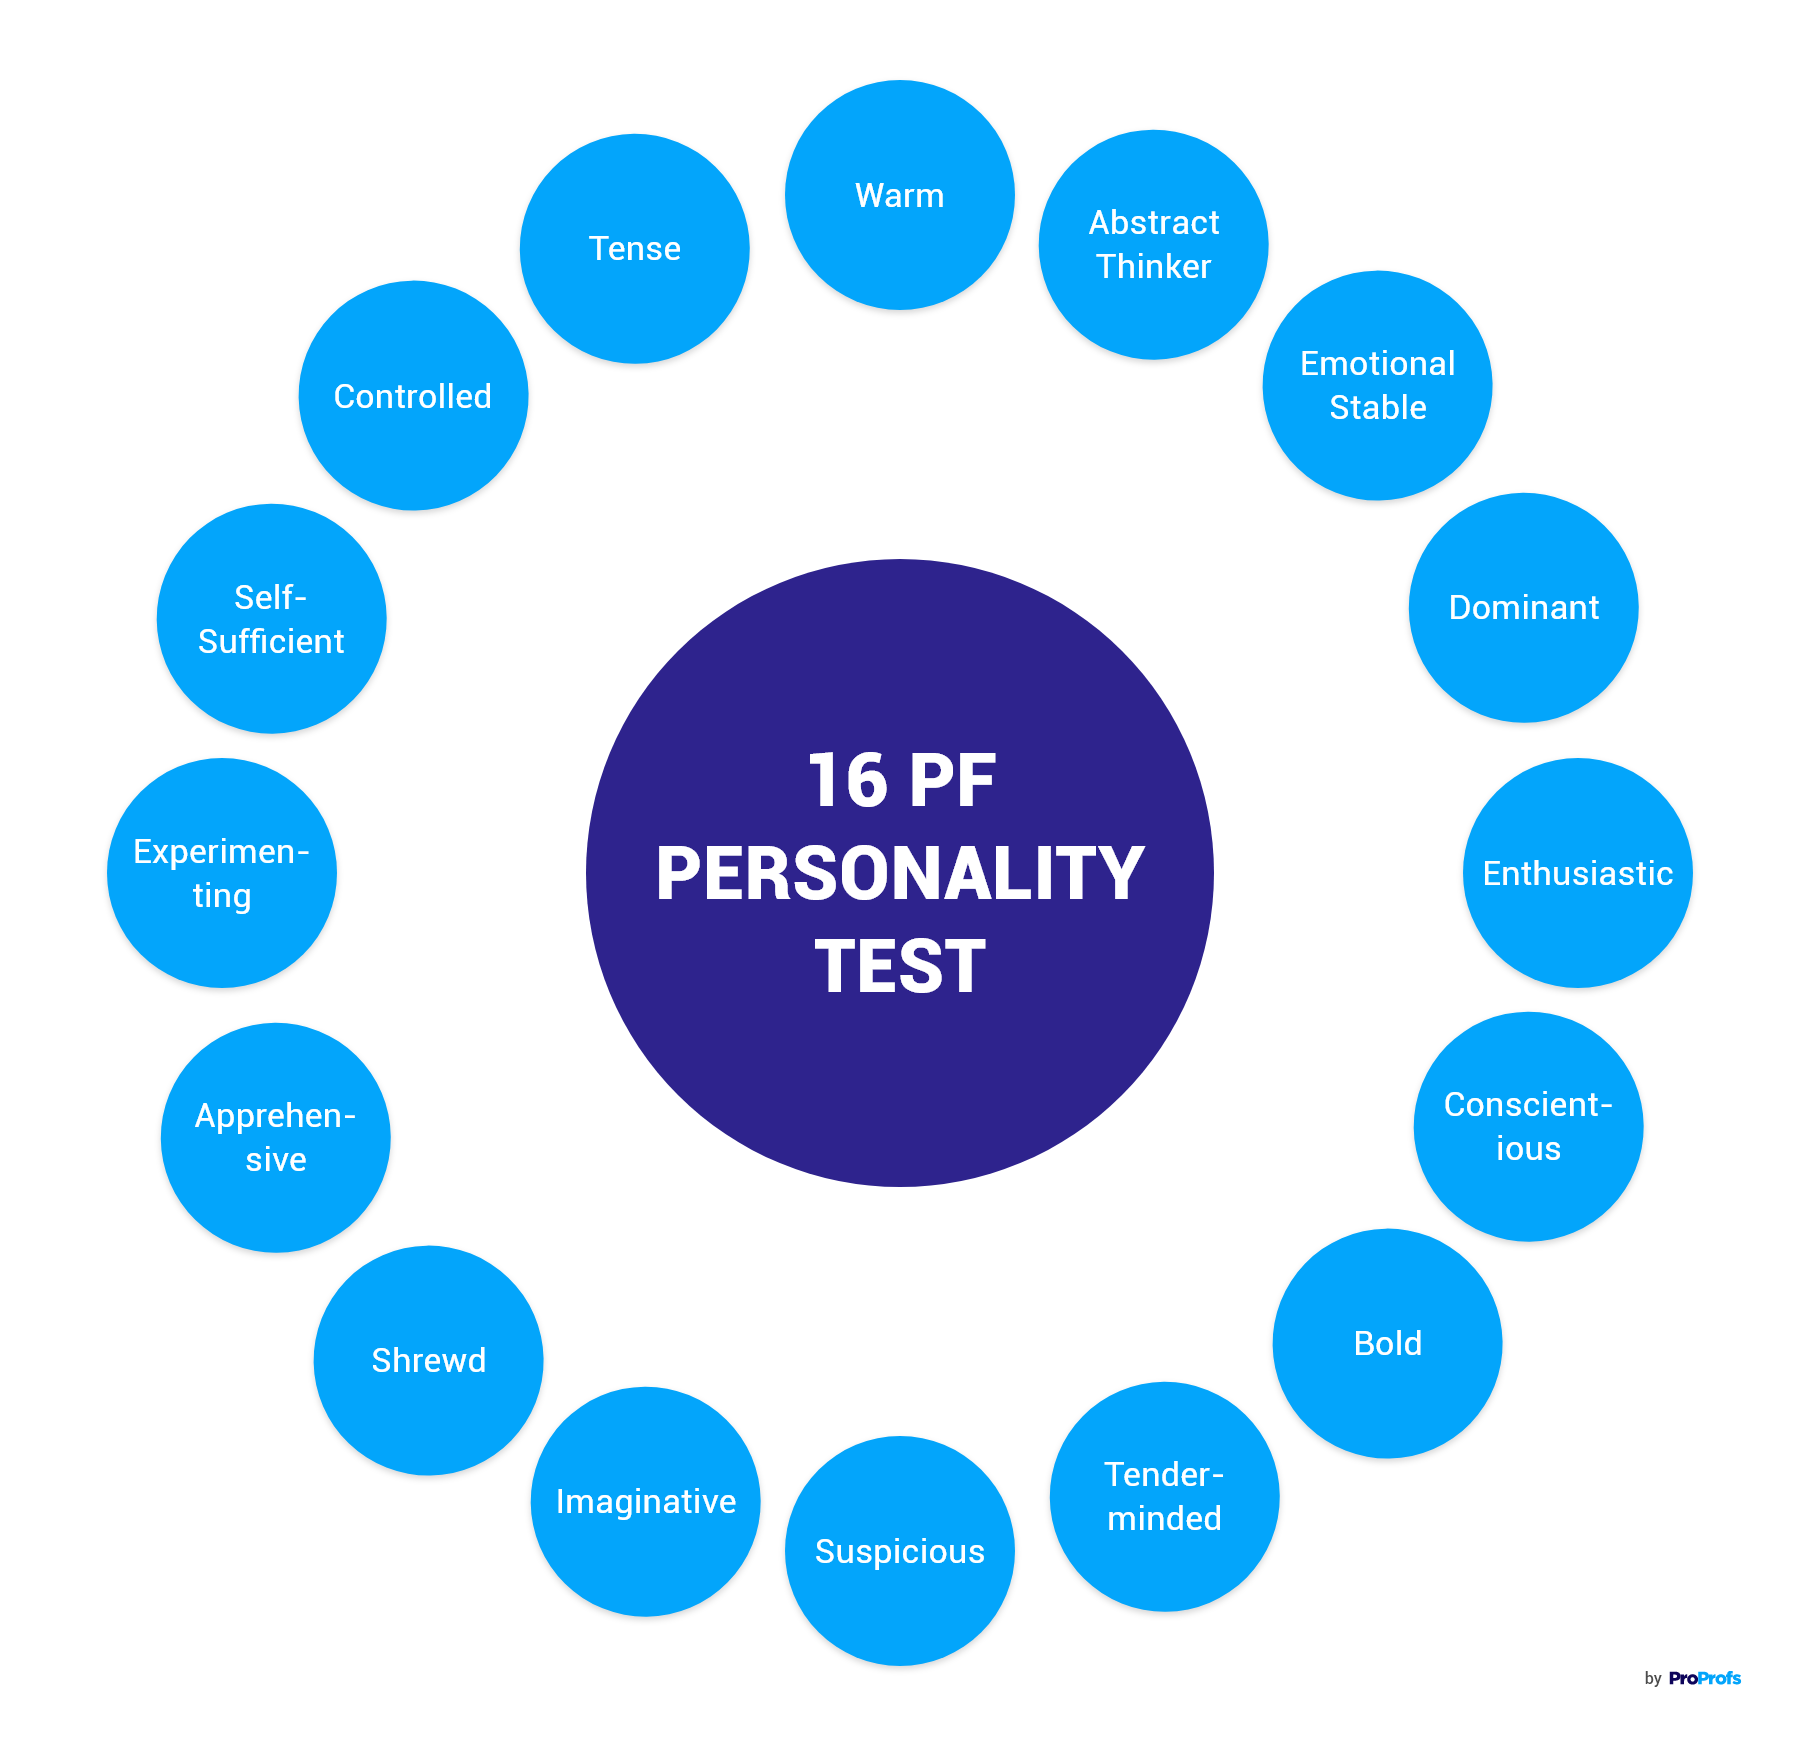 16 Personality Factor Questionnaire